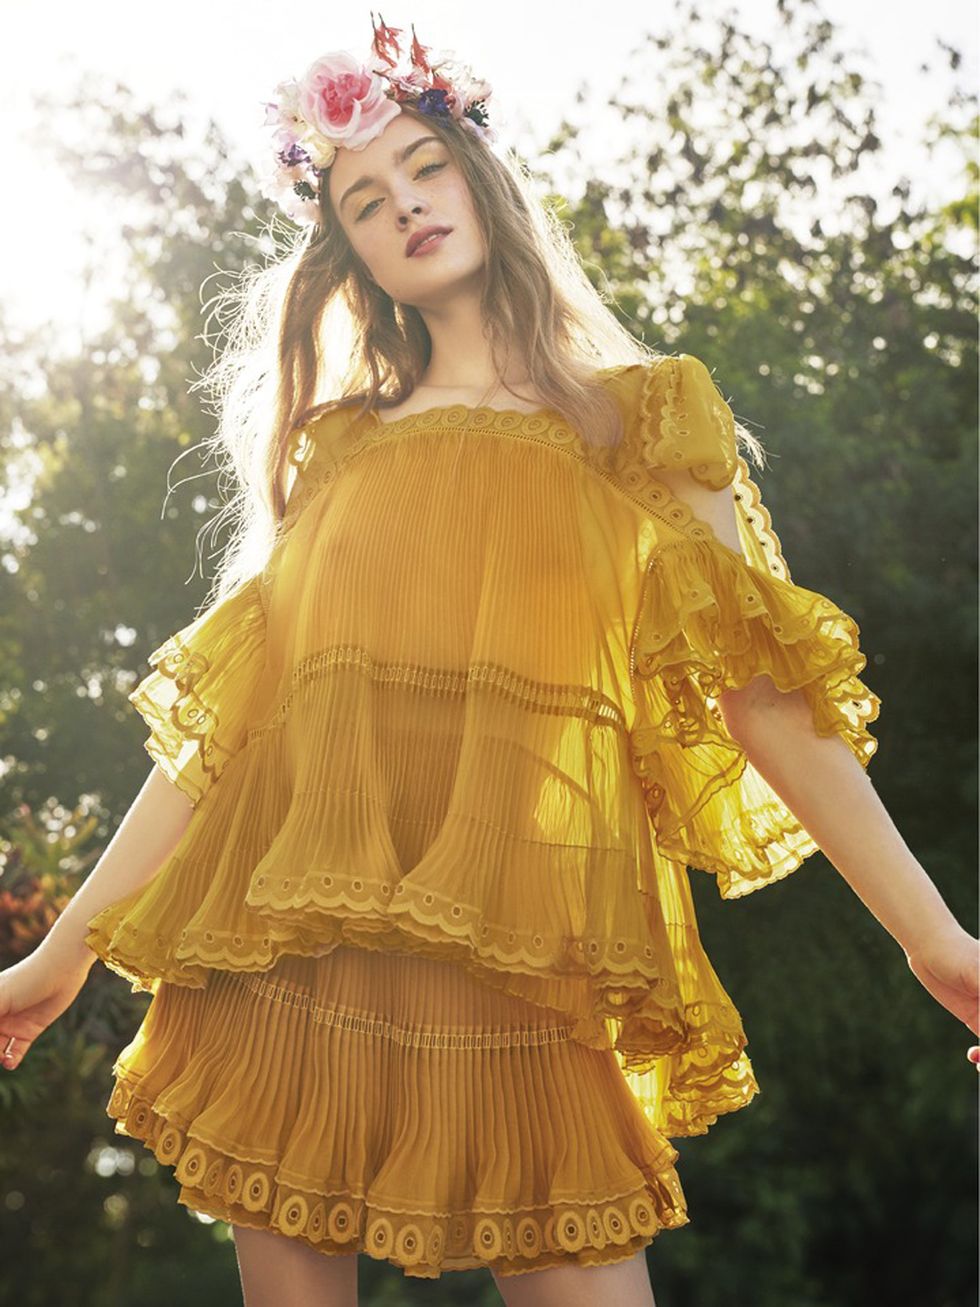 Yellow, Clothing, Shoulder, Beauty, Fashion, Blond, Dress, Sunlight, Long hair, Joint, 